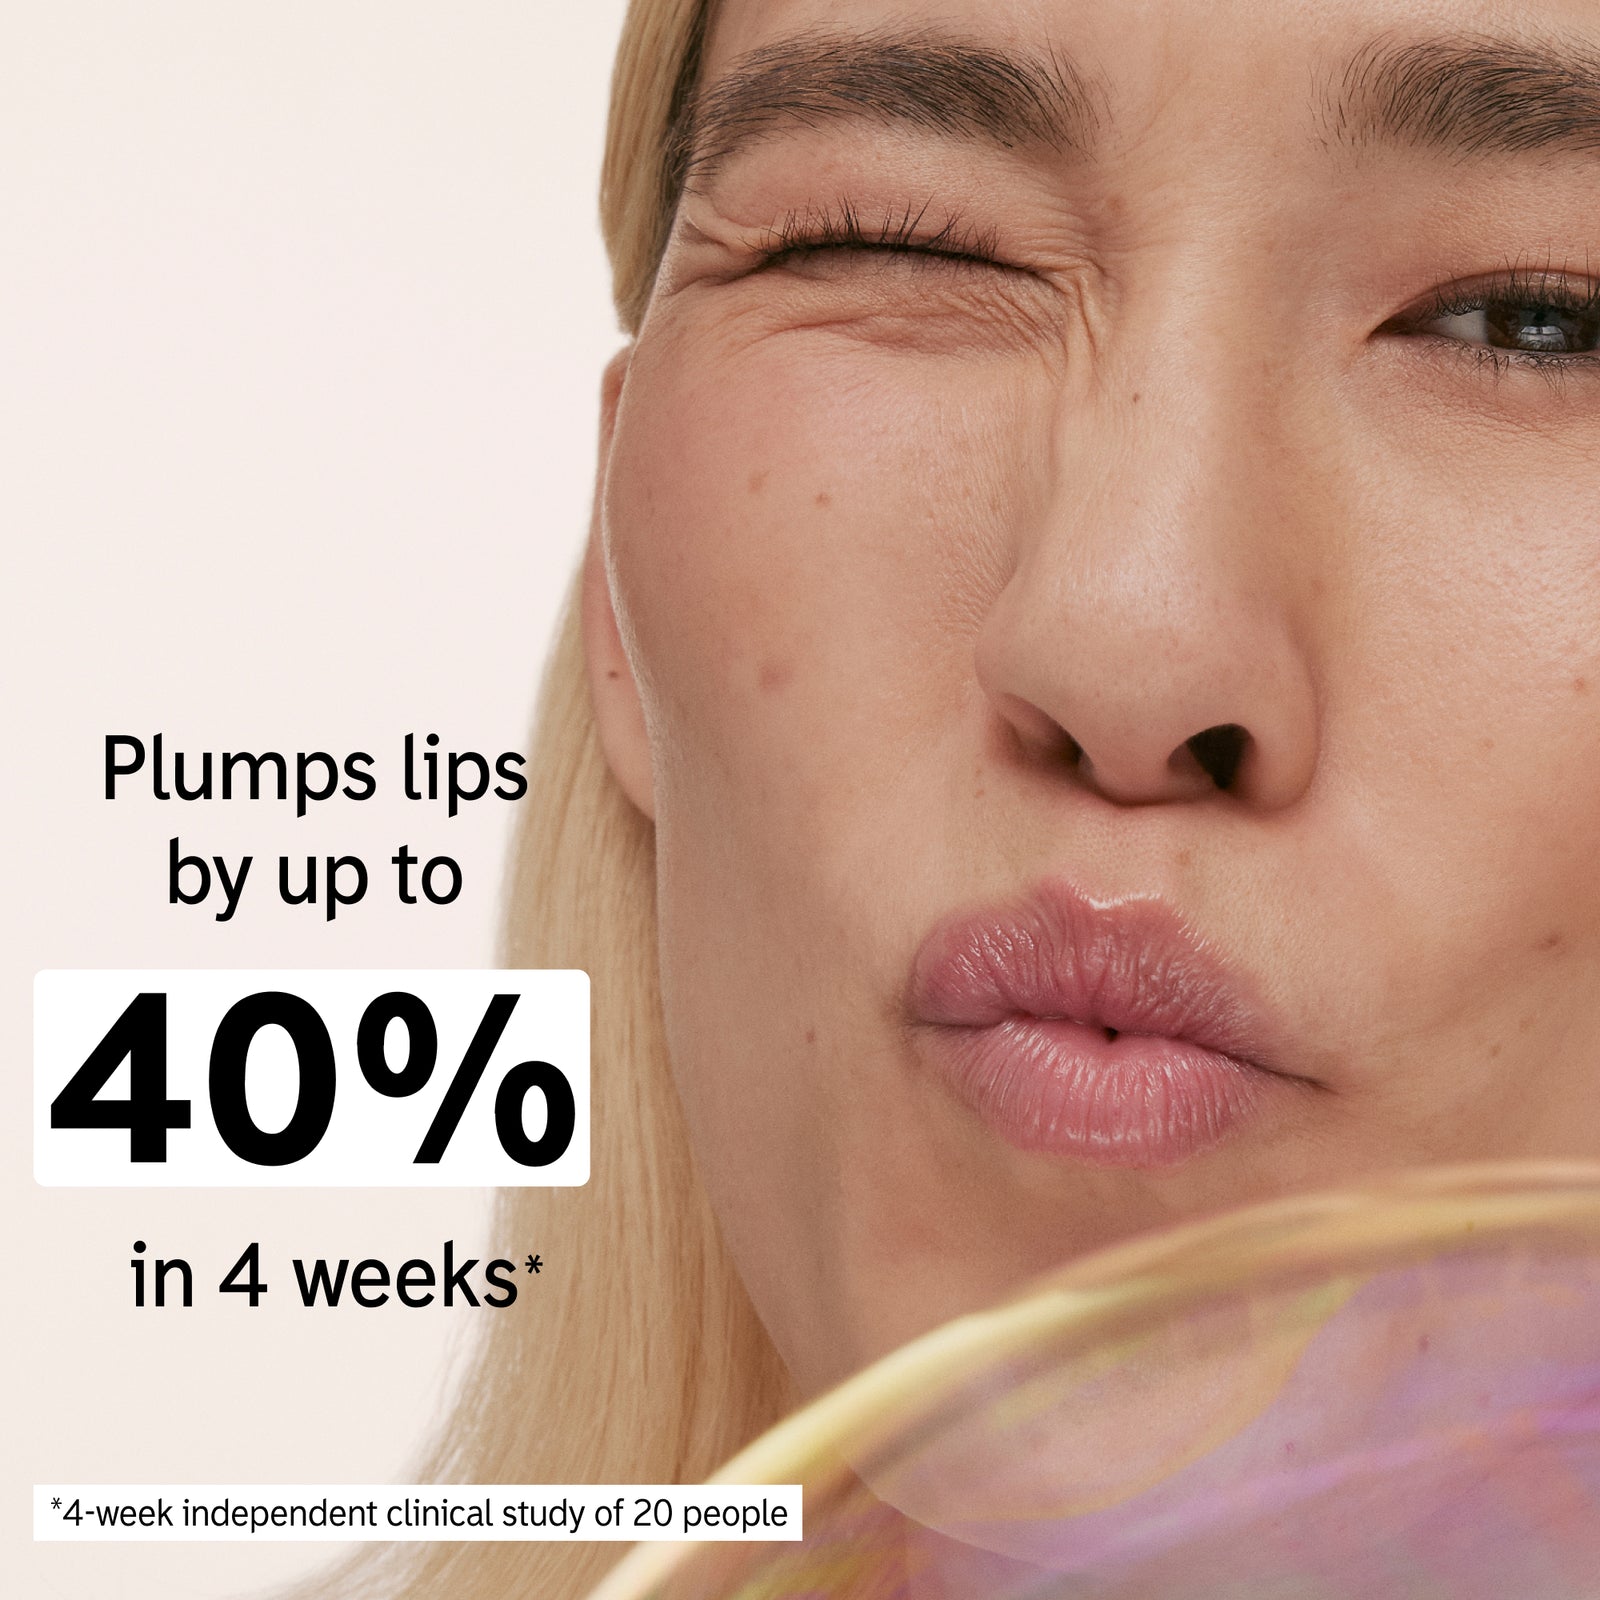 Model holding Tripeptide Lip Balm with key claim statistic